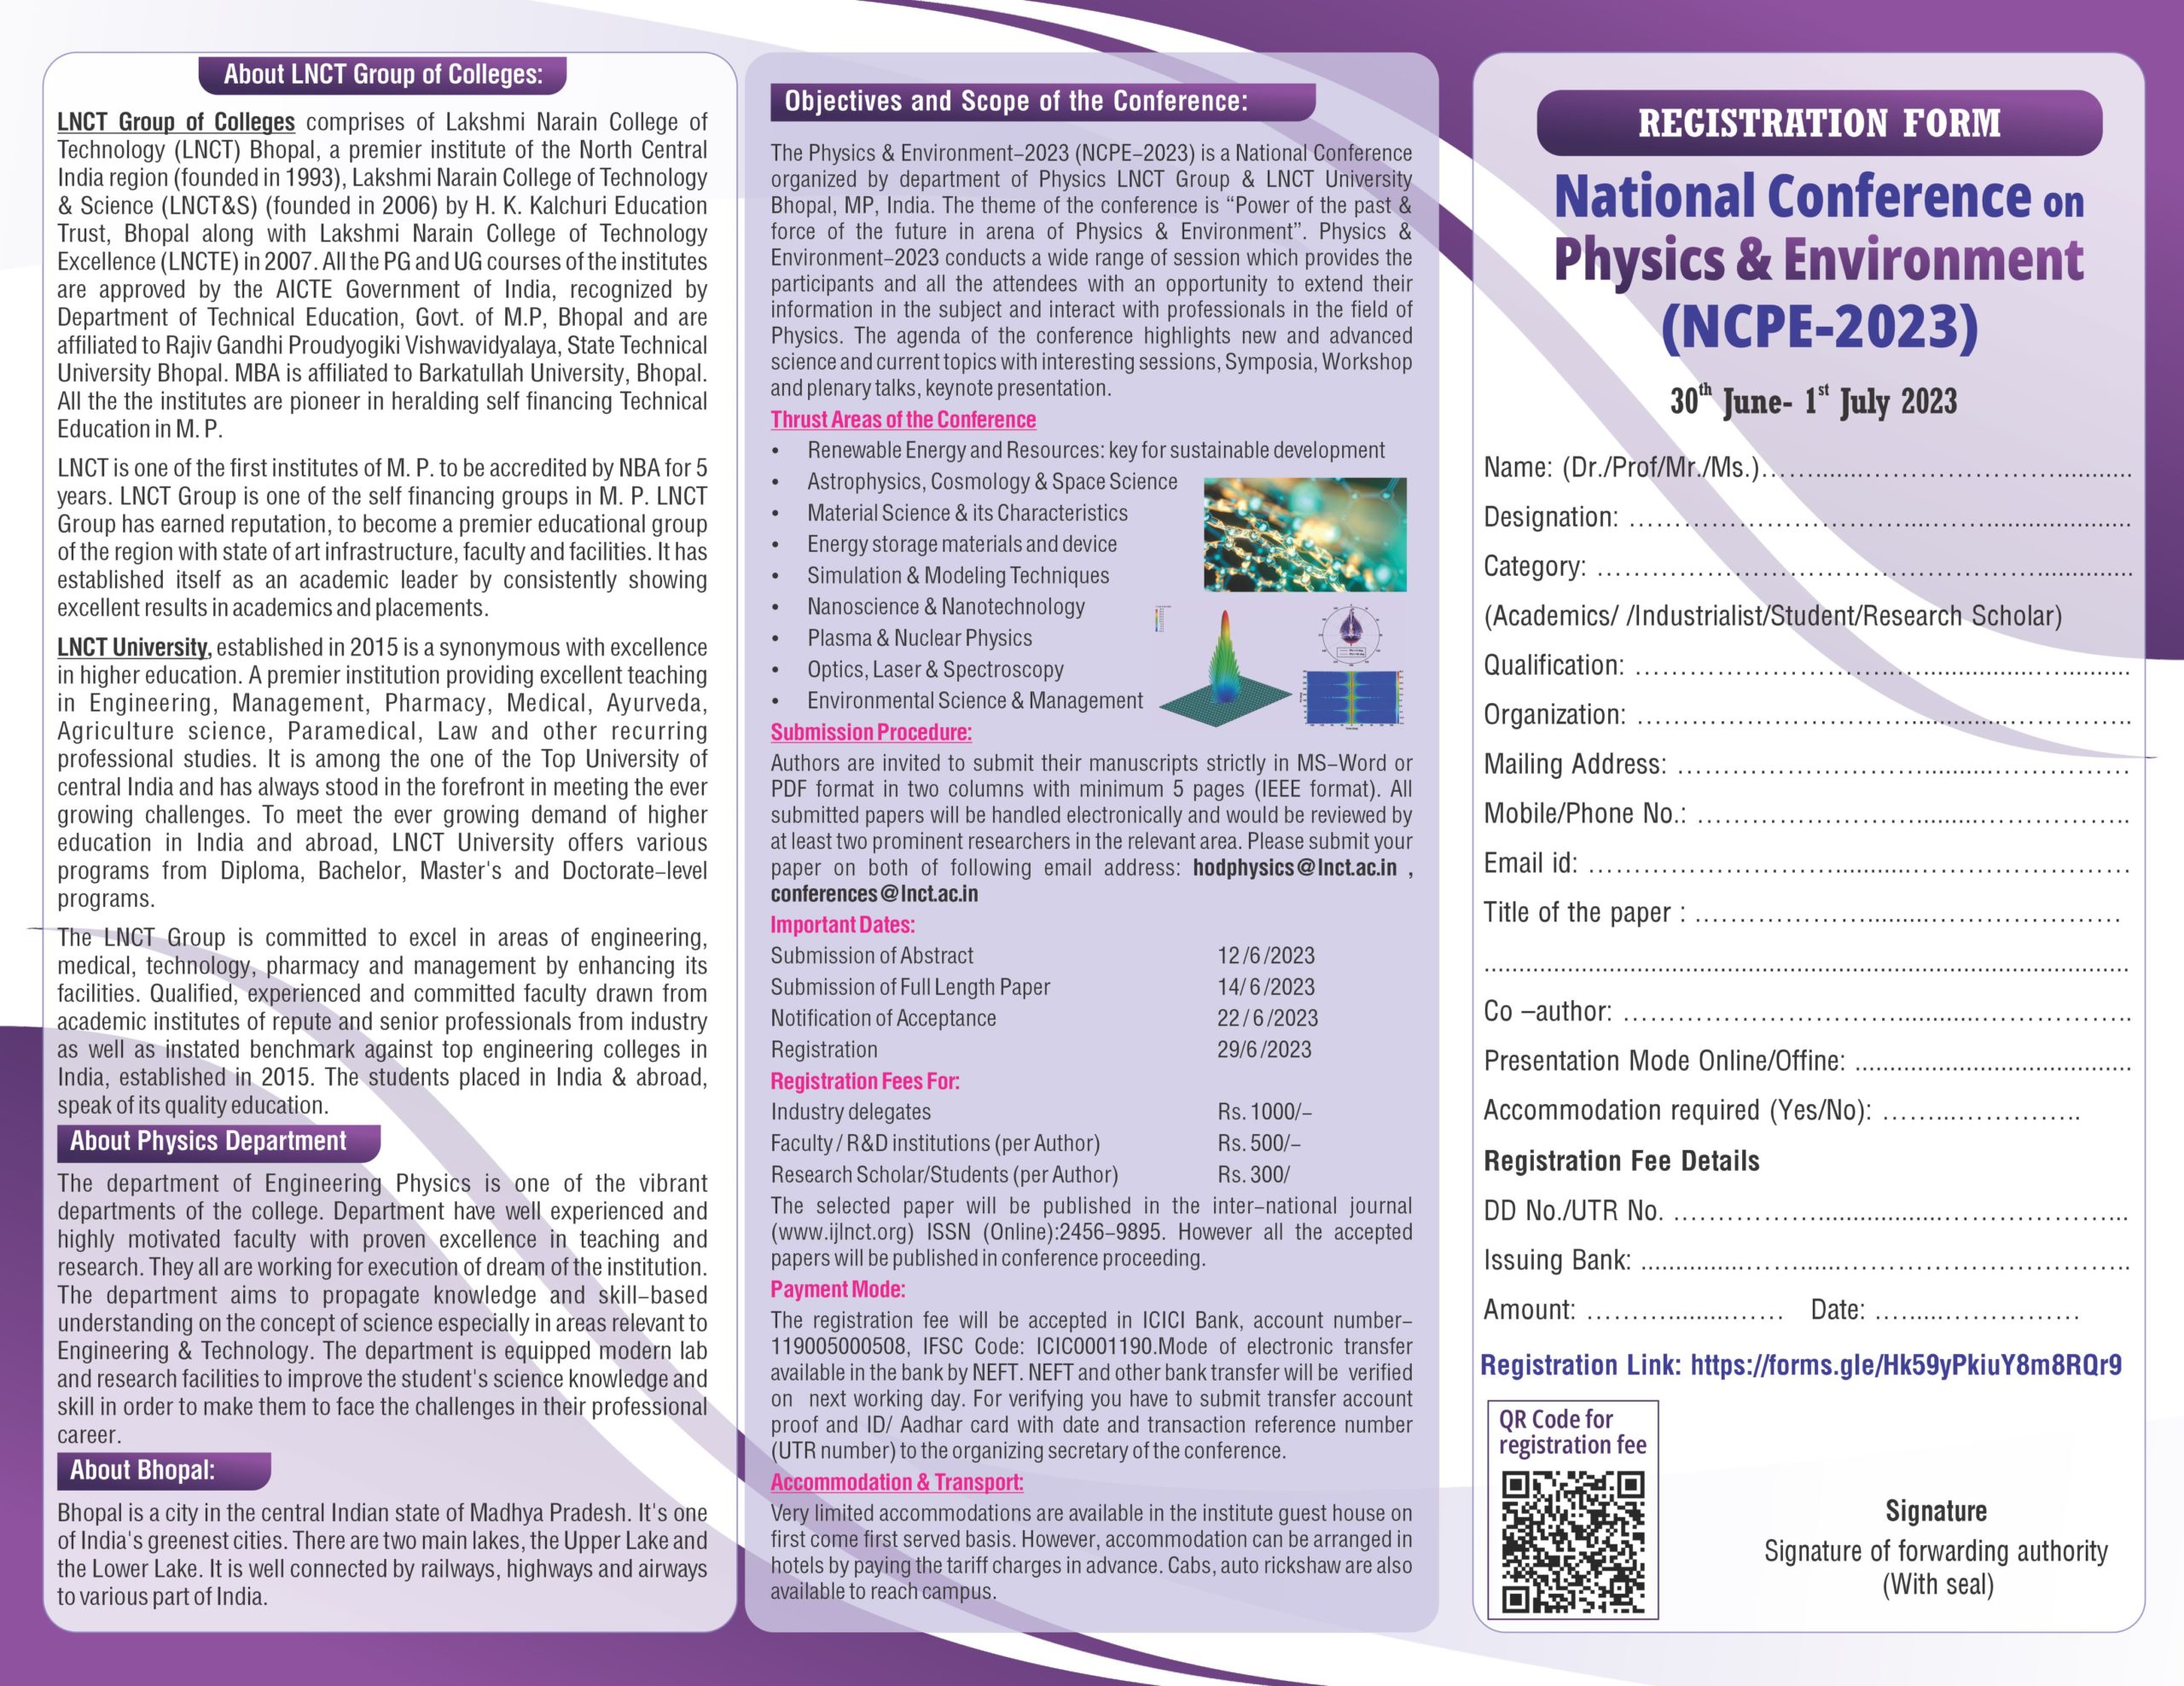 National Conference on Physics & Environment (NCPE-2023) 4